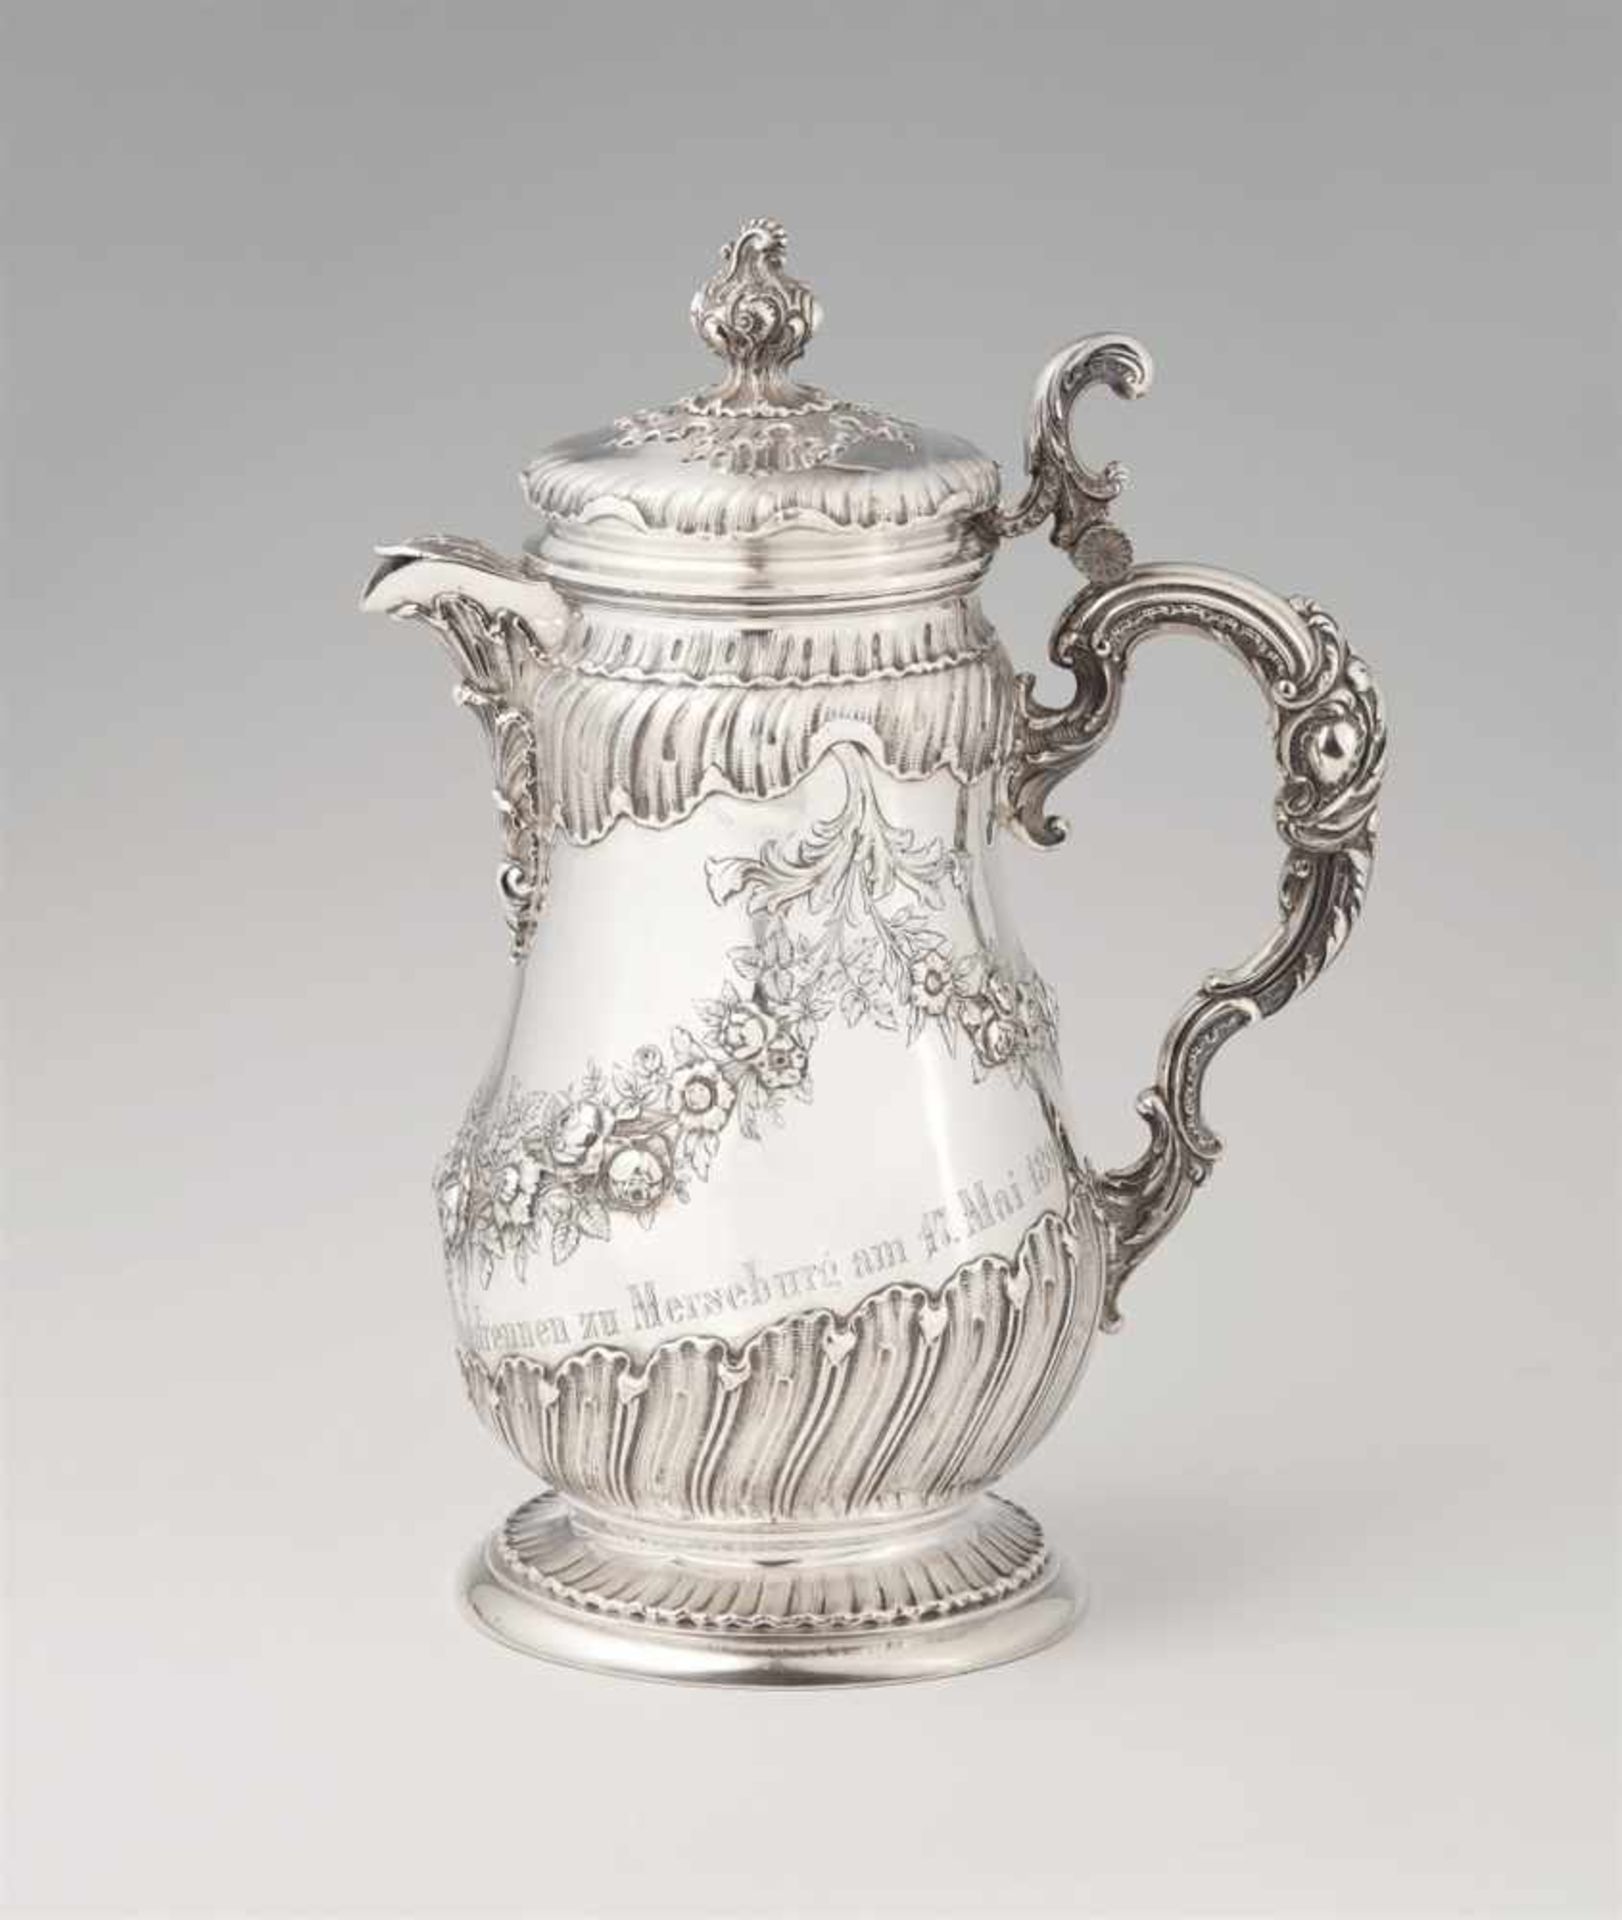 A Berlin silver horse racing trophyA large pear-form pitcher with slip lid, engraved "Kaiser Wilhelm - Bild 2 aus 11